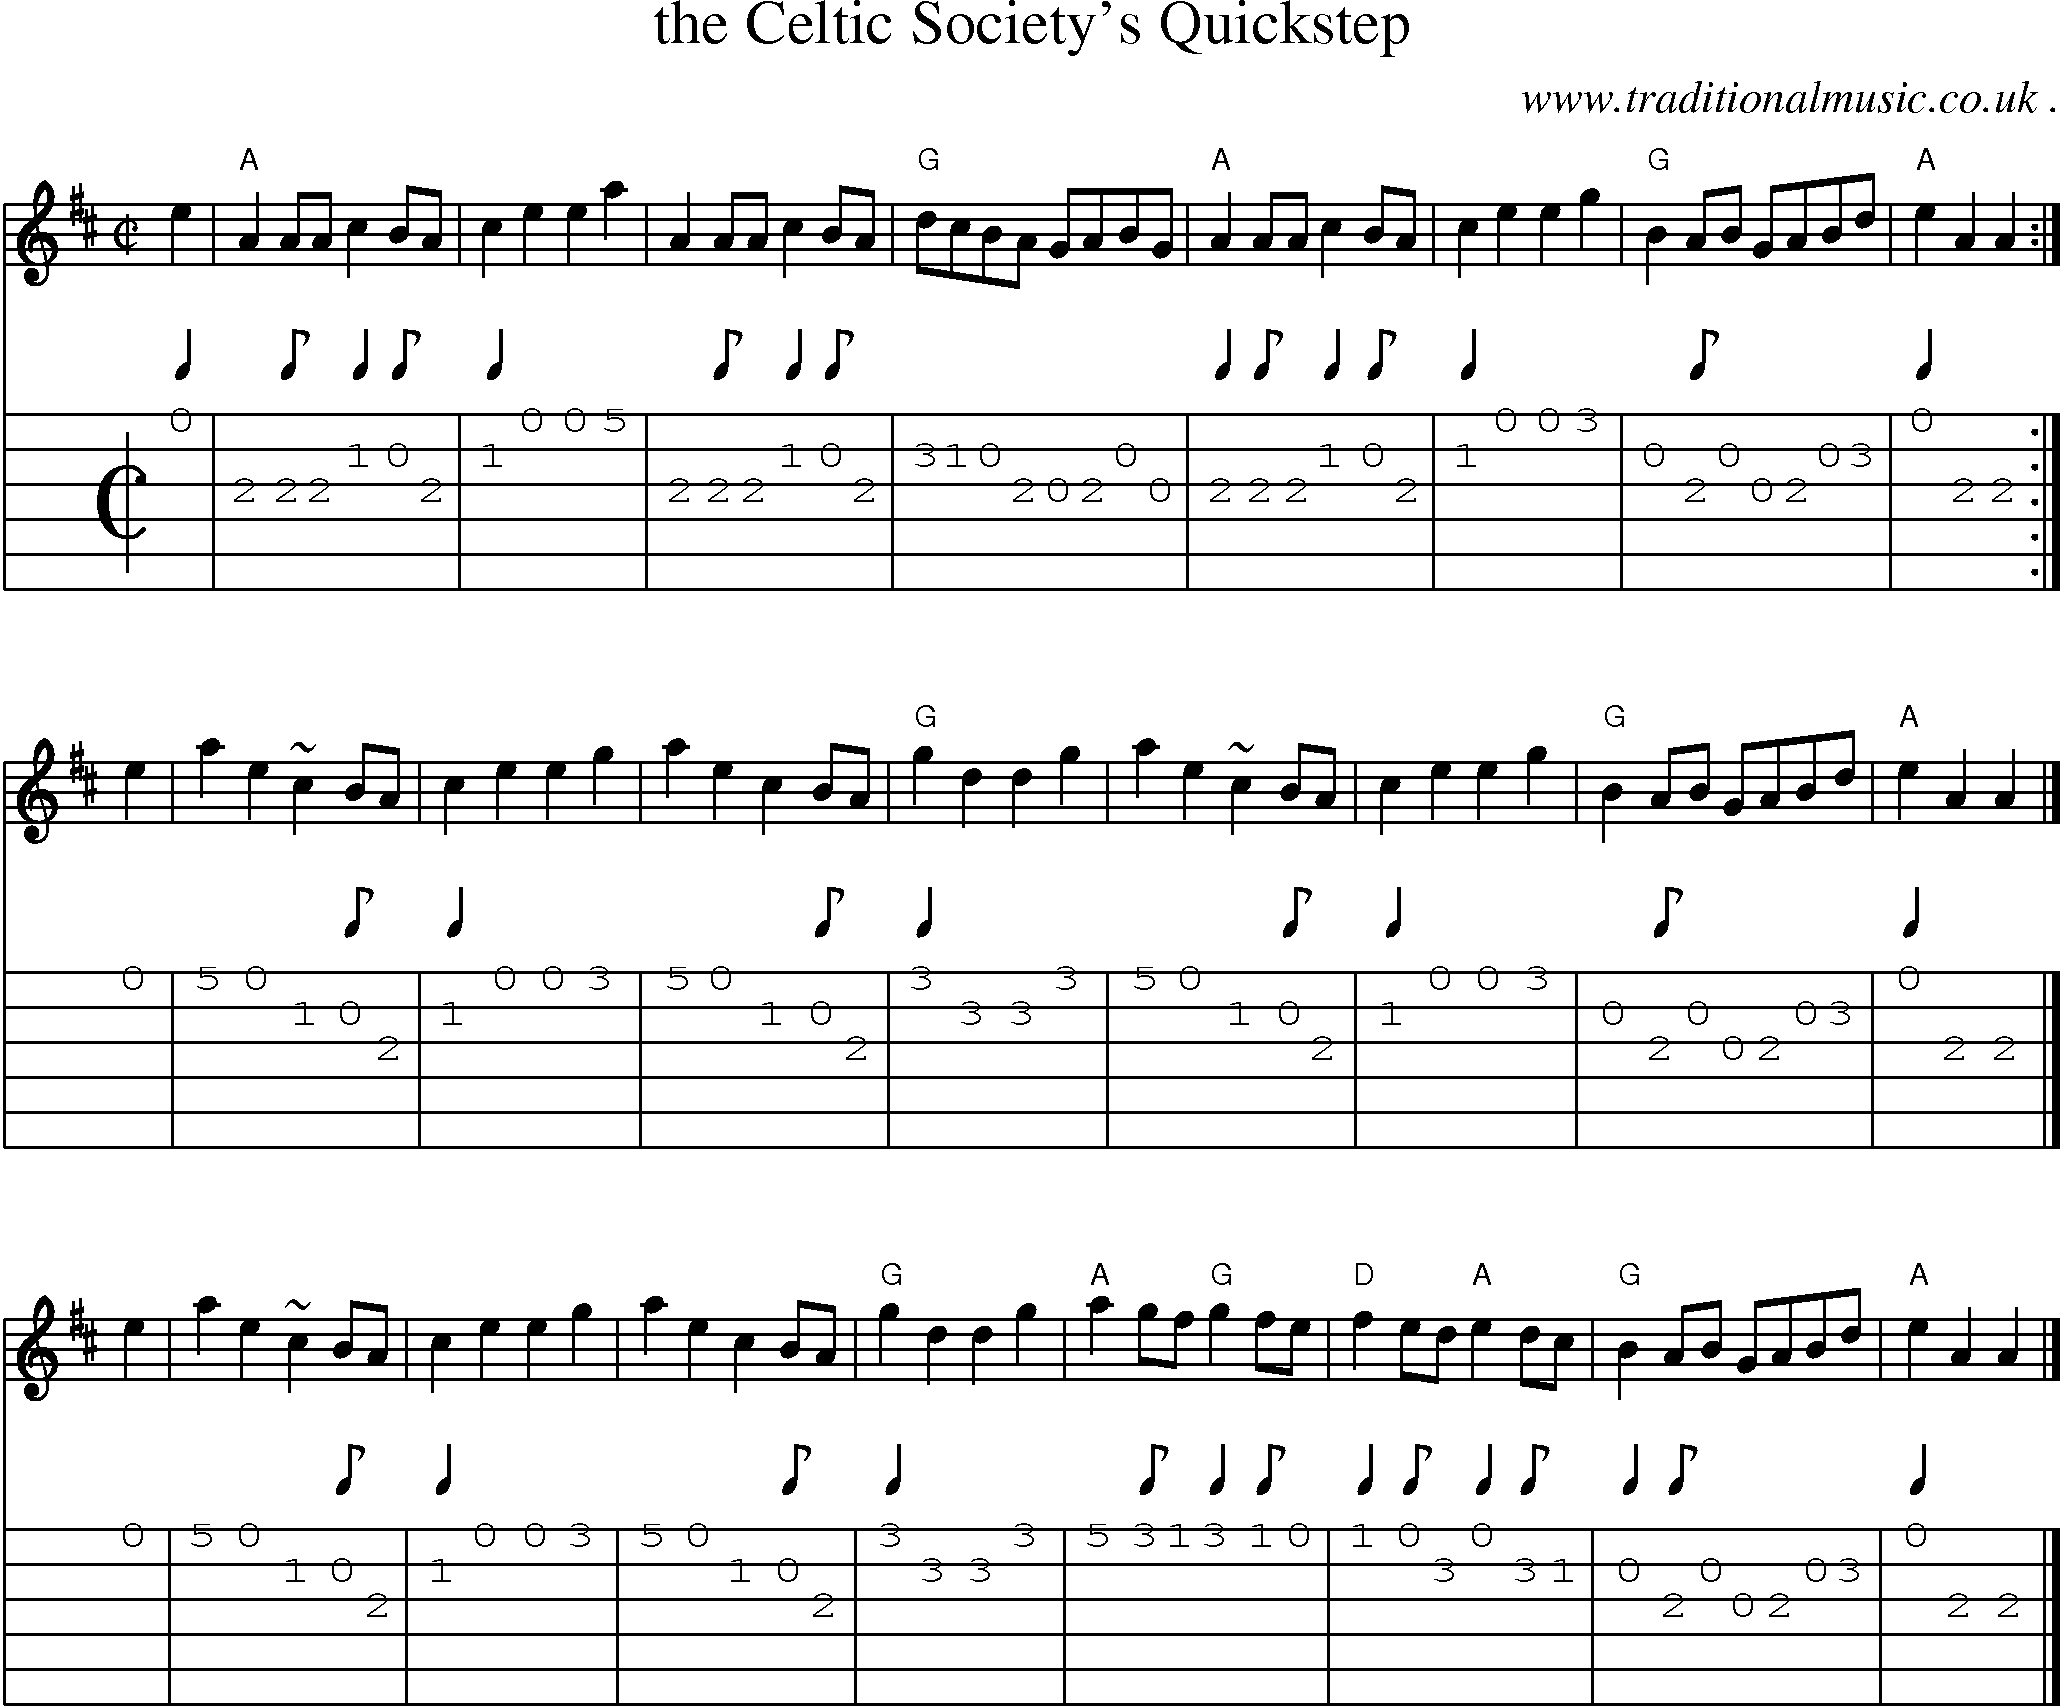 Sheet-music  score, Chords and Guitar Tabs for The Celtic Societys Quickstep